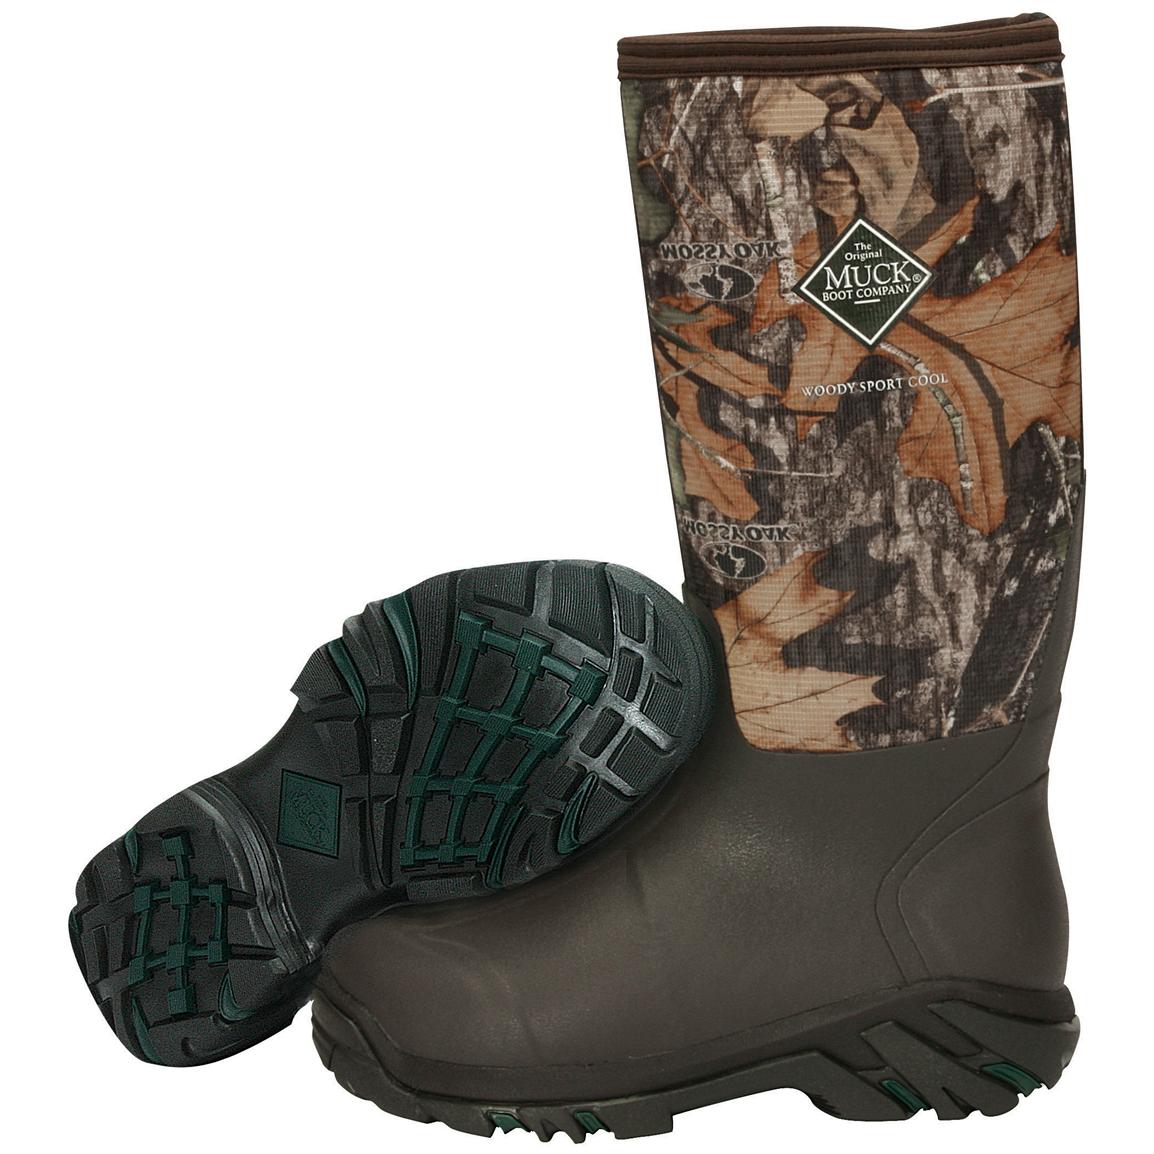 Men's Muck Boot Company™ Woody Sport Cool Hunting Boots, Mossy Oak ...